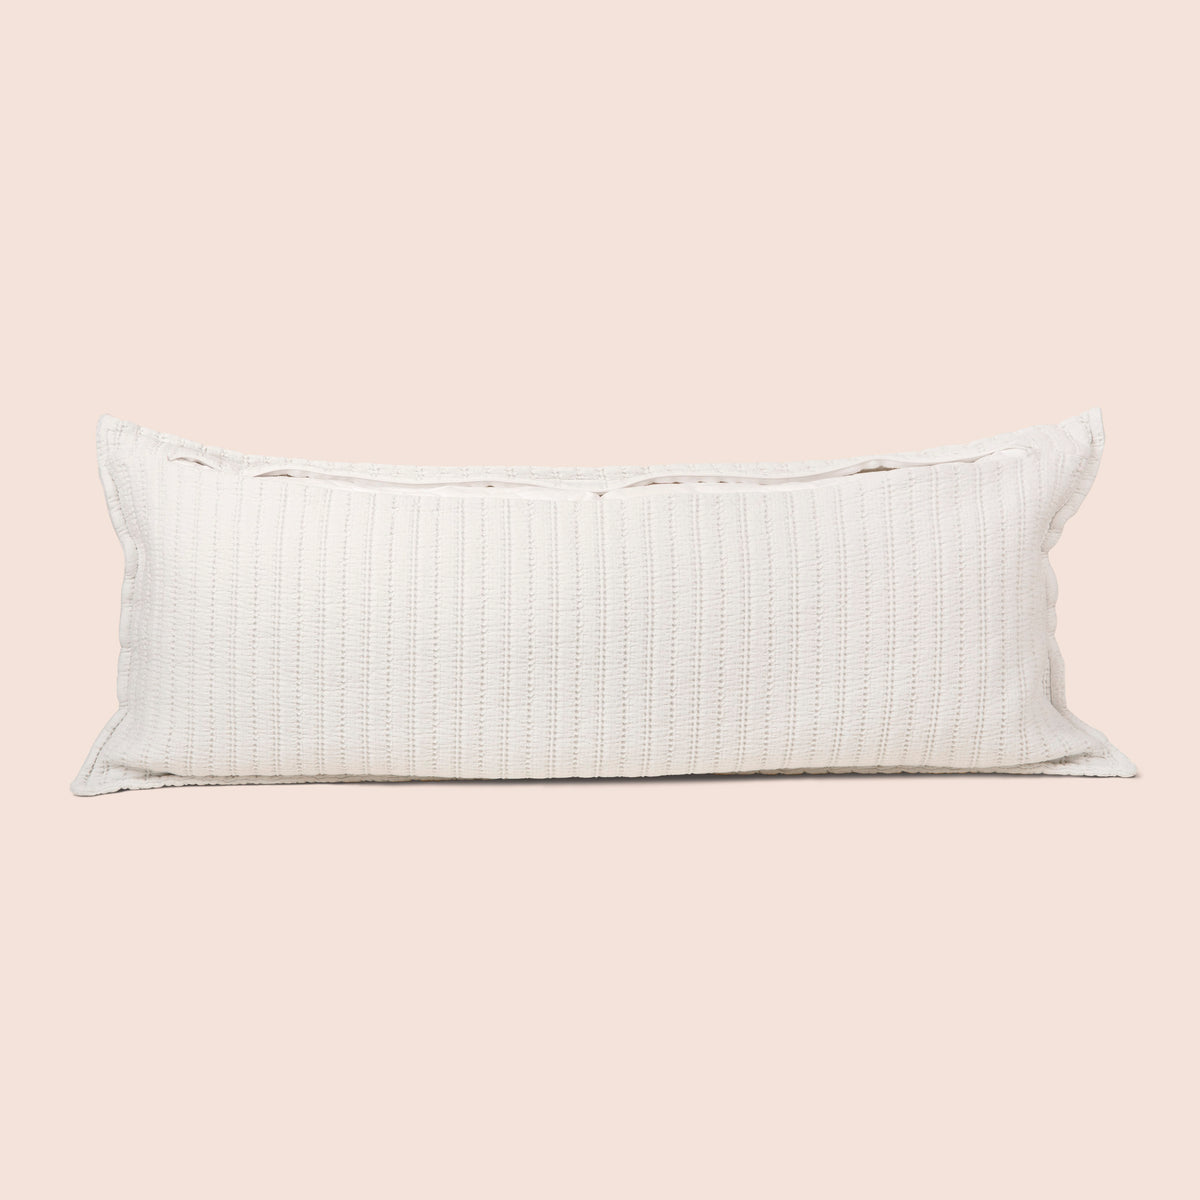 Image of the back of the Ecru Ridgeback Lumbar Pillow Cover on a lumbar pillow with the back zipper open on a light pink background